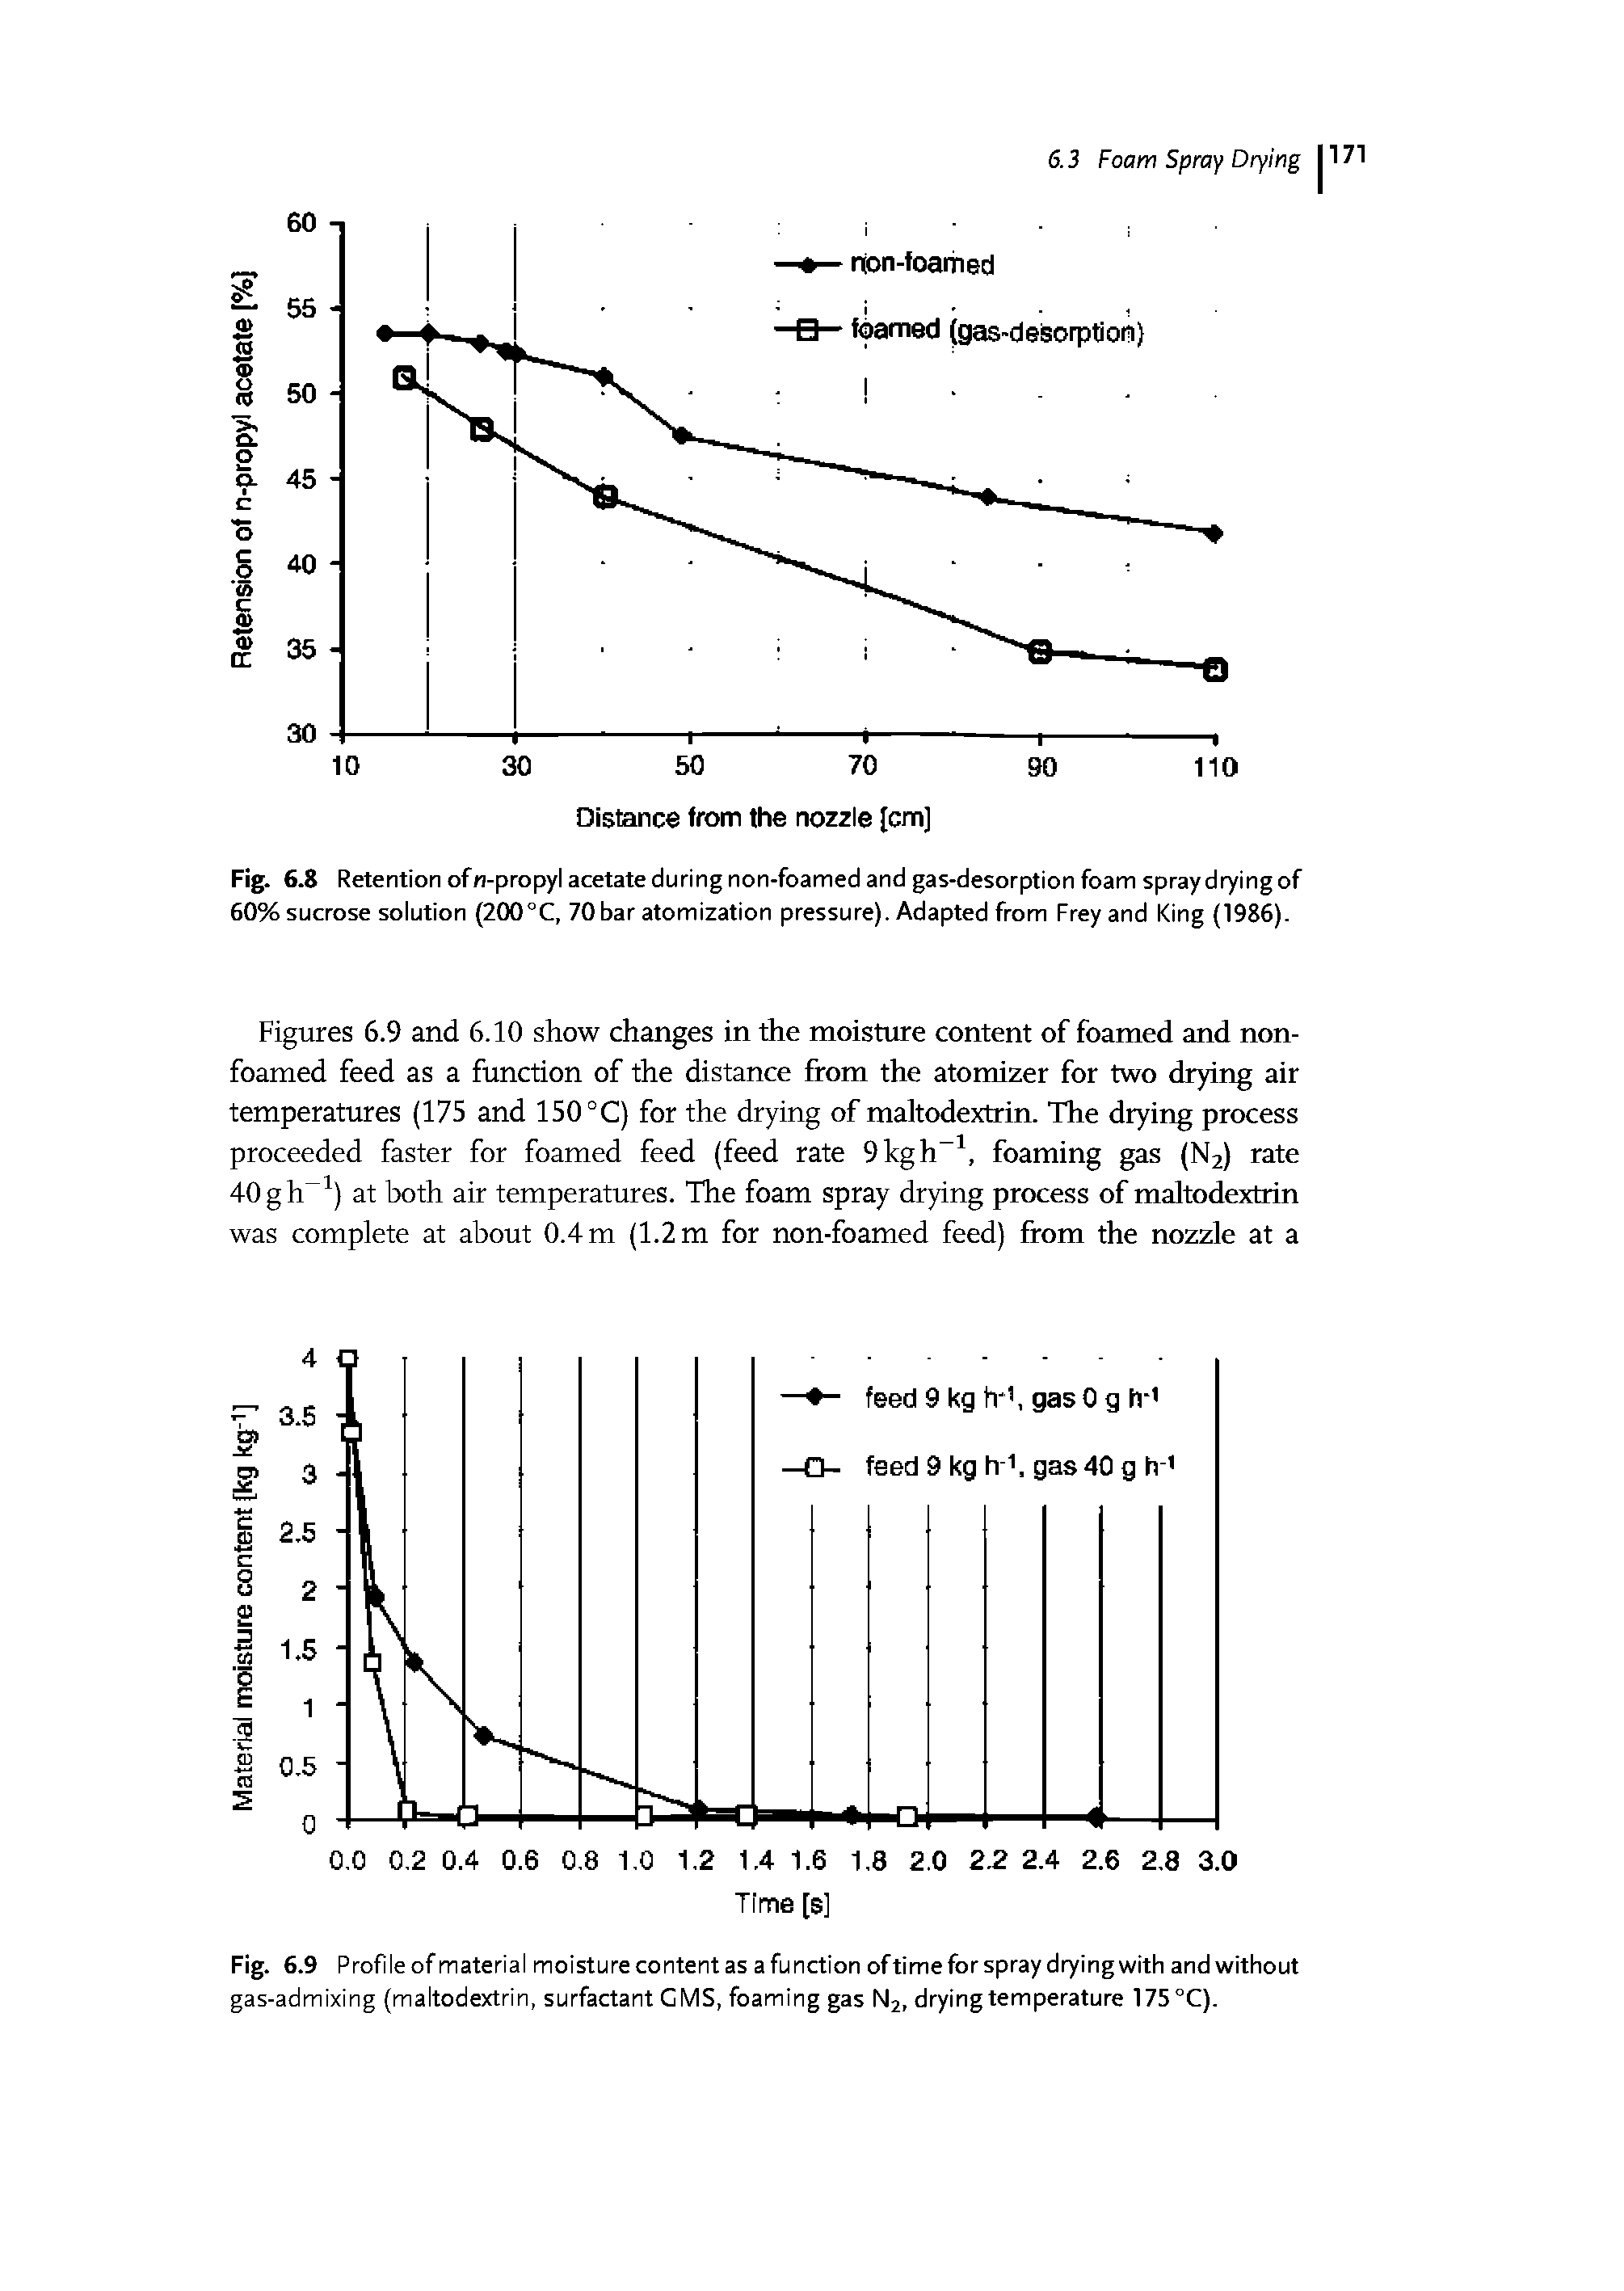 Fig. 6.8 Retention ofn-propyl acetate during non-foamed and gas-desorption foam spray drying of 60% sucrose solution (200°C, 70 bar atomization pressure). Adapted from Frey and King (1986).